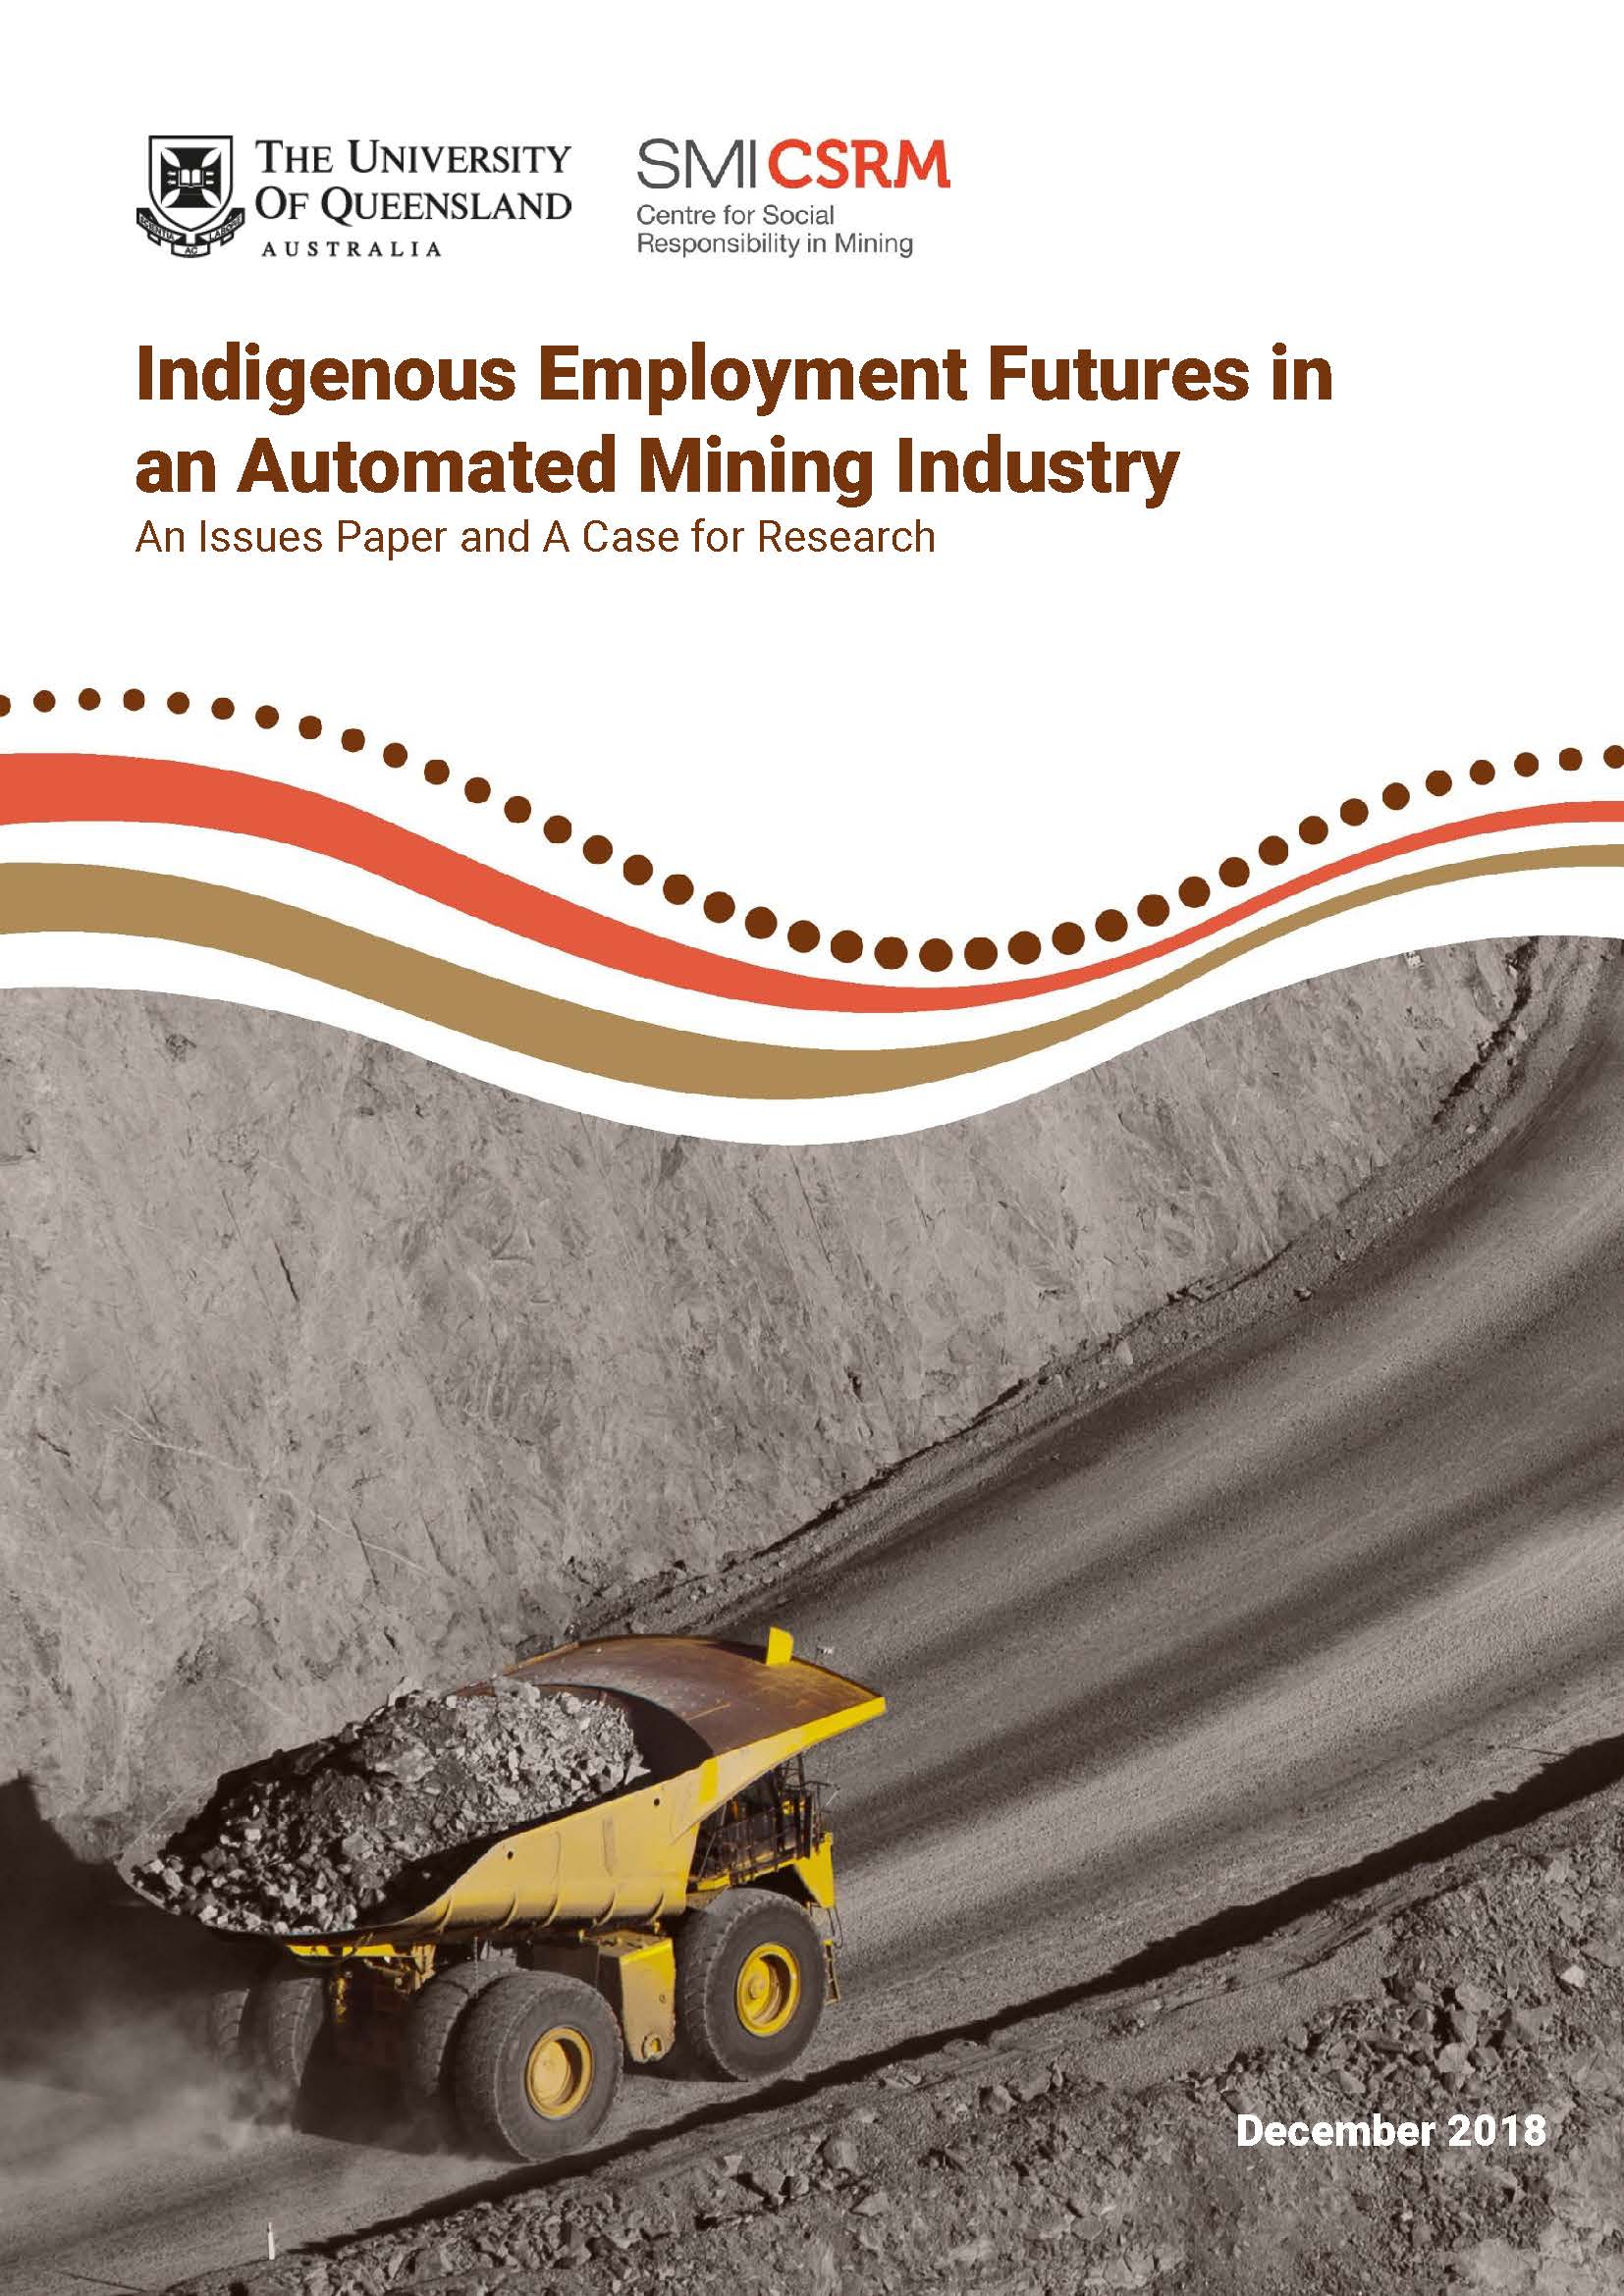 Indigenous employment futures in an automated mining industry